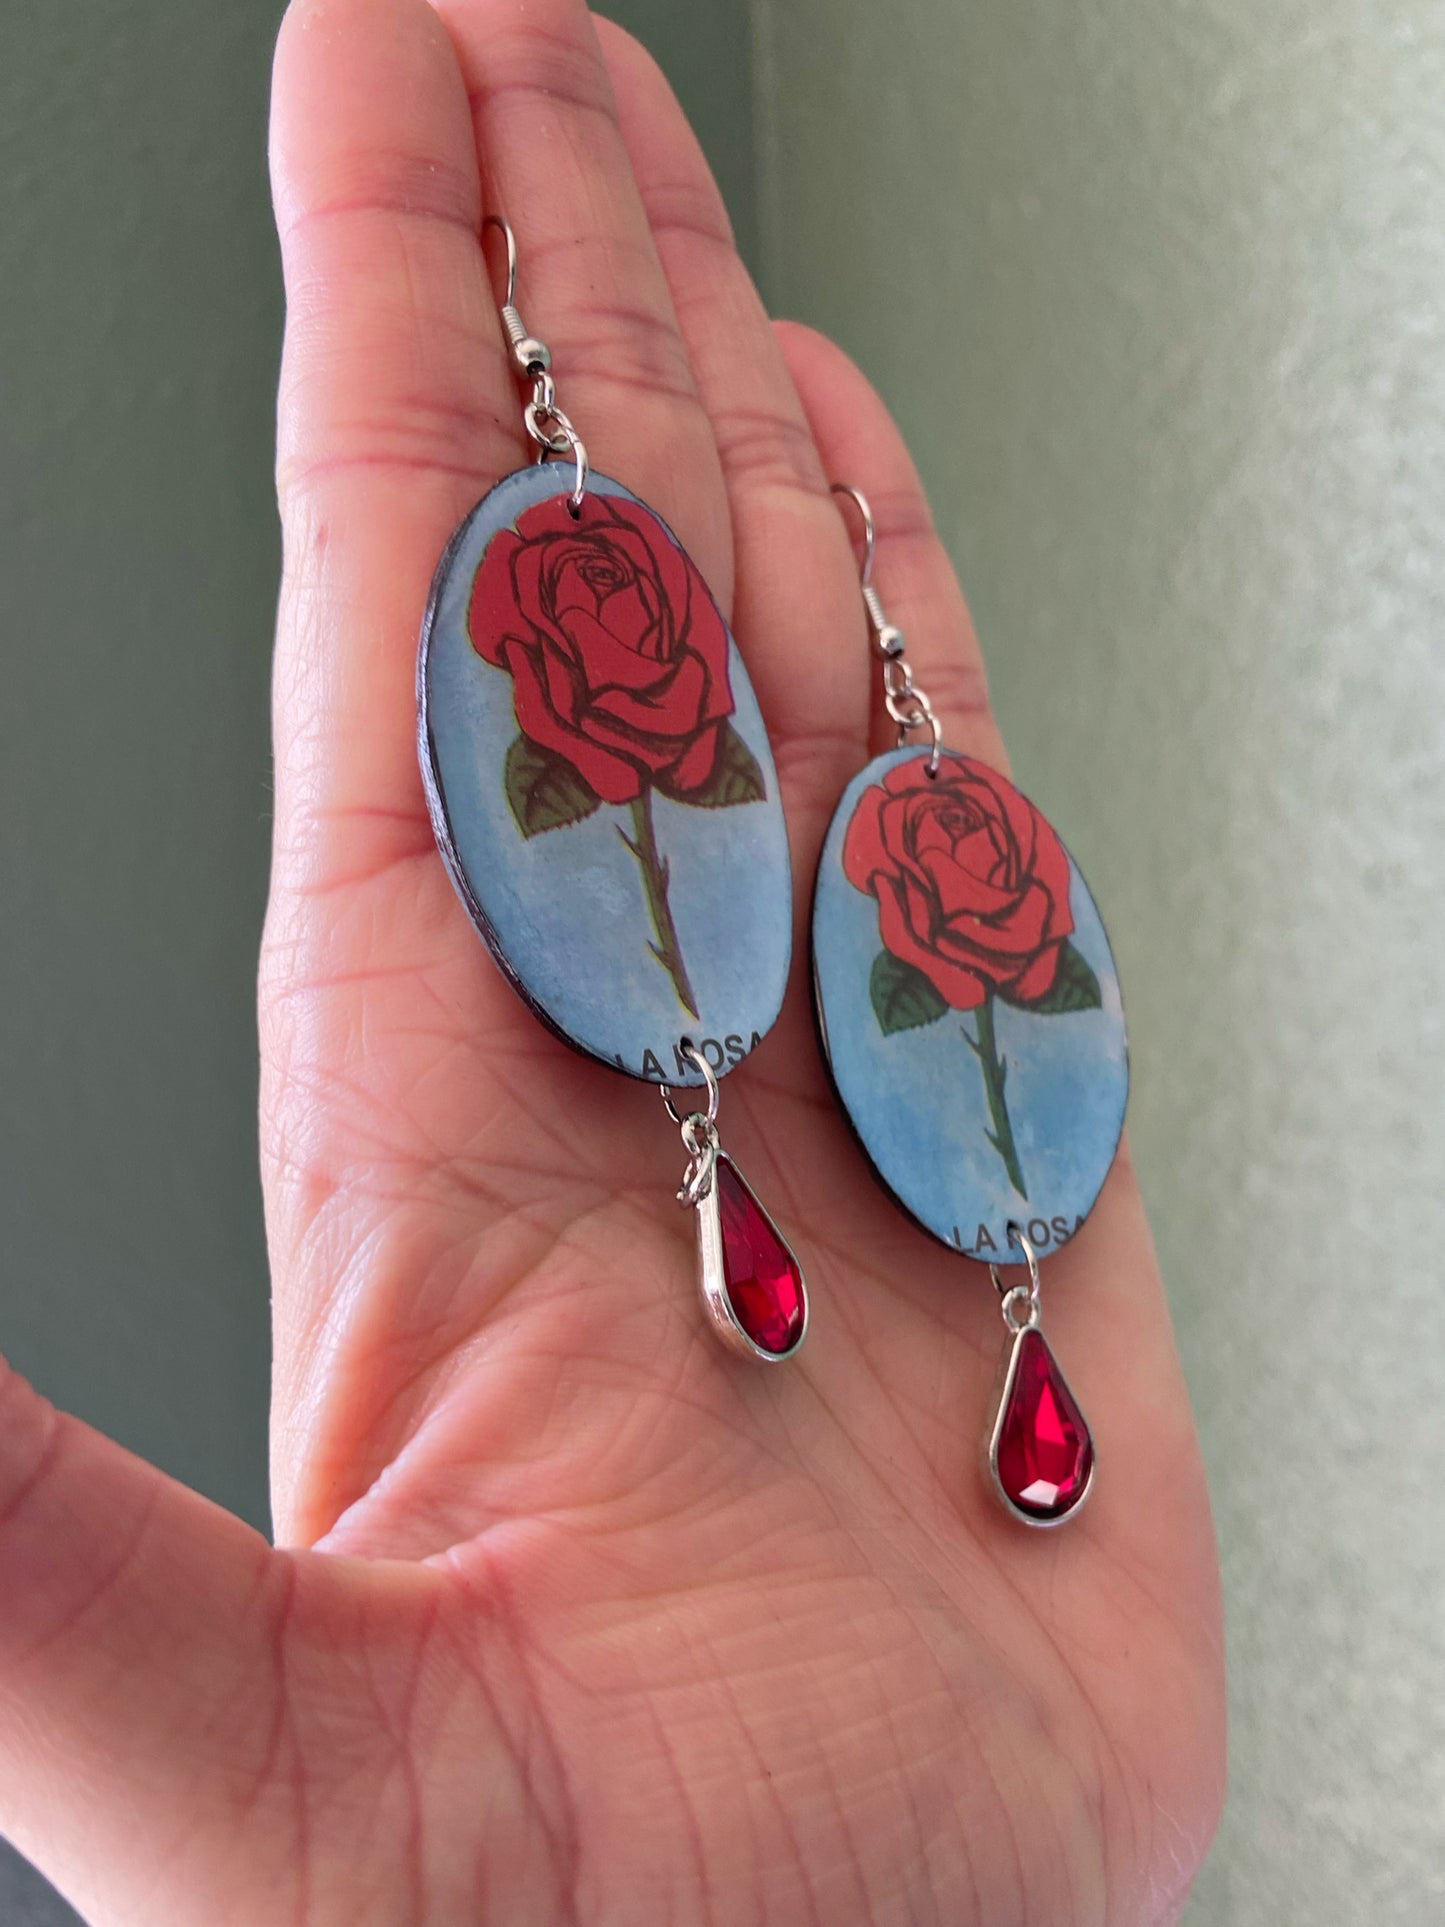 Loteria Cards- Upcycled paper "La Rosa" oval earrings with red faceted glass crystal bead dangle